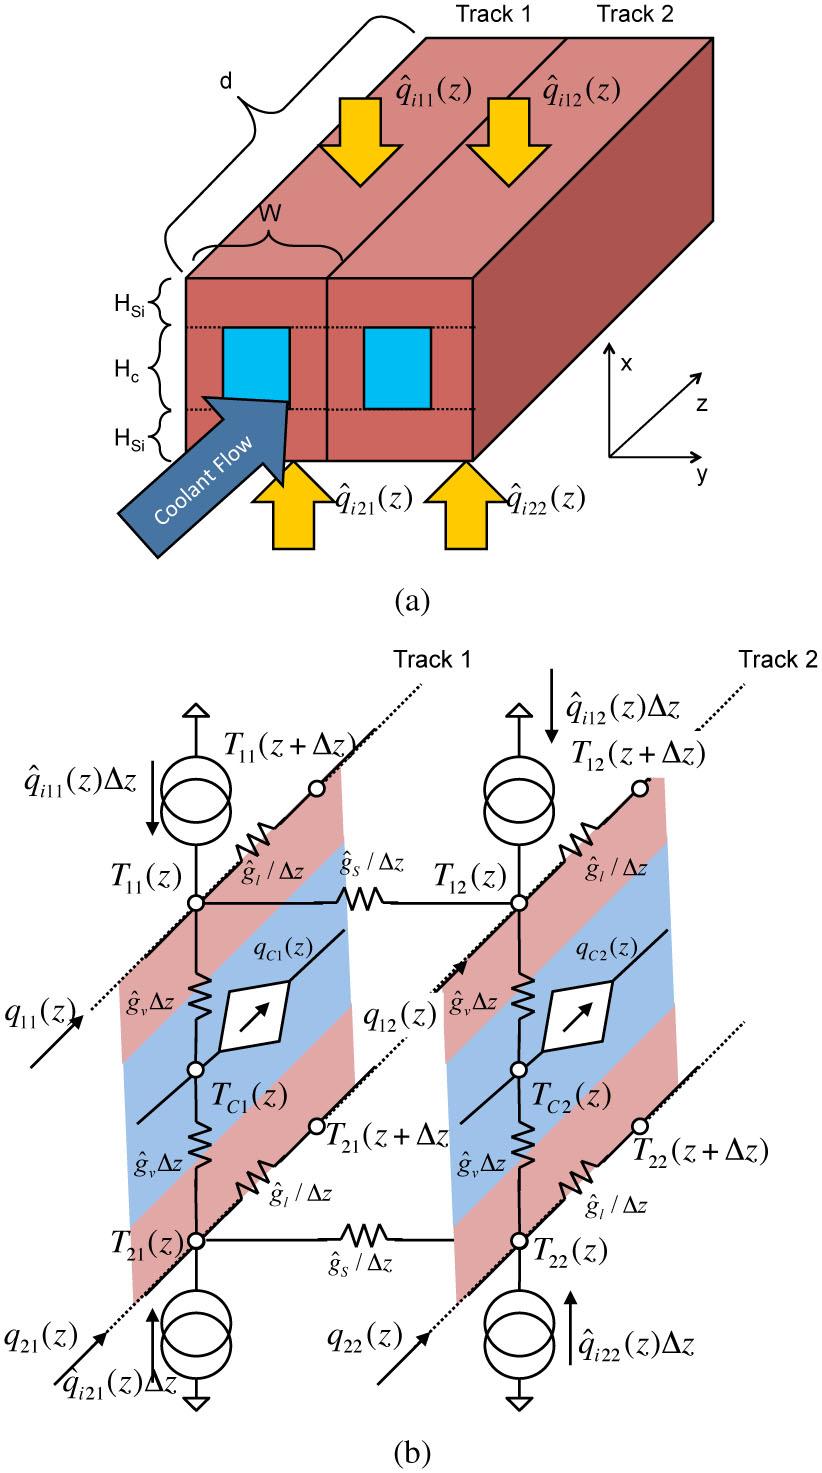 1152 IEEE TRANSACTIONS ON COMPUTER-AIDED DESIGN OF INTEGRATED CIRCUITS AND SYSTEMS, VOL. 33, NO. 8, AUGUST 214 Fig. 8. (a) Test structure with two tracks of microchannels stacke next to each other.